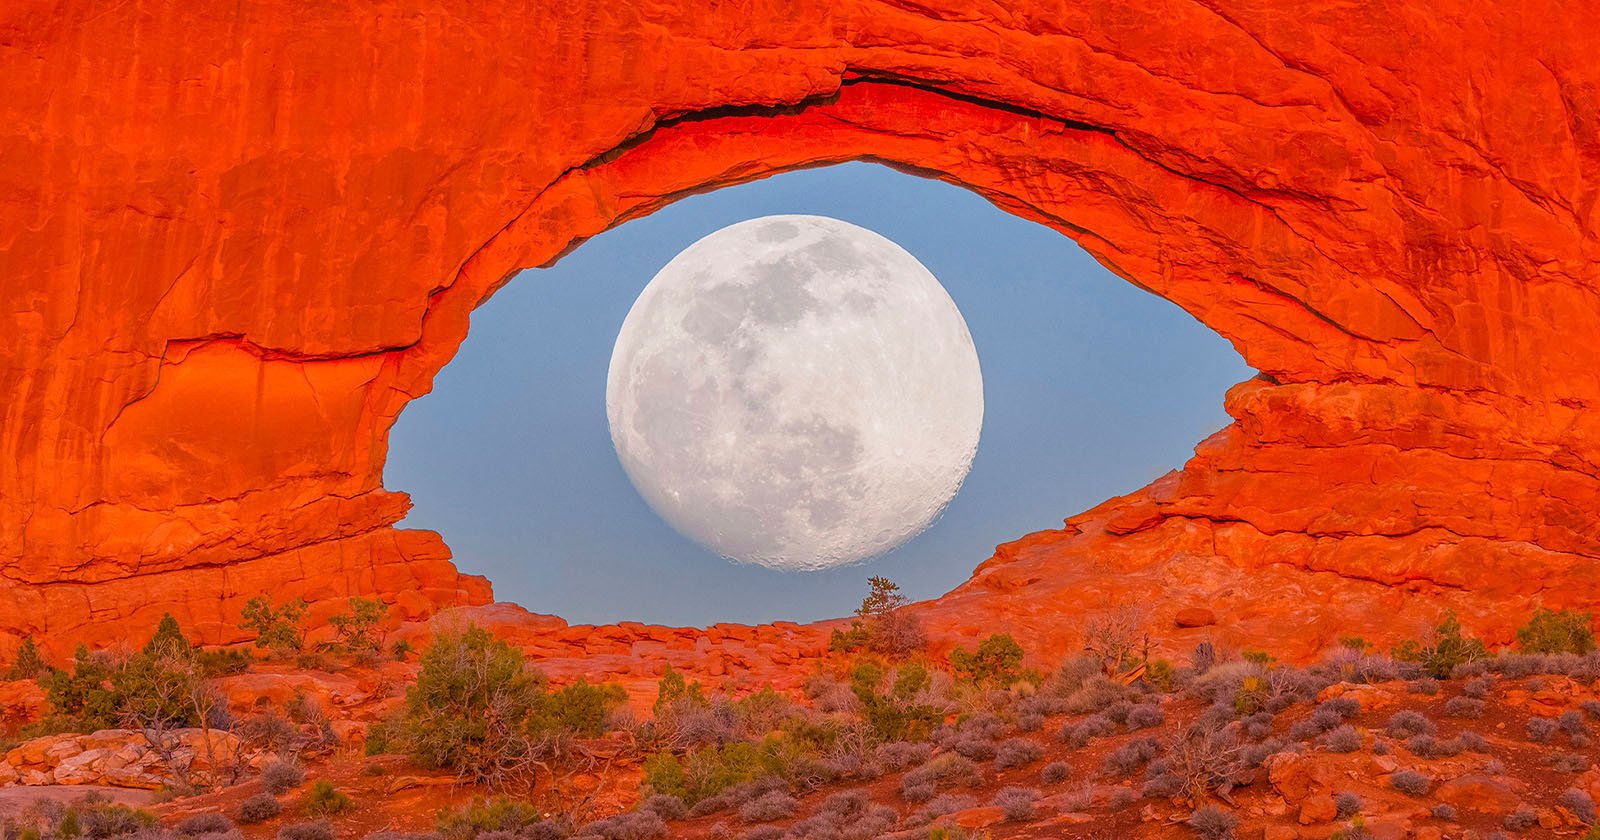 Image of Full Moon Through a Rock Formation Looks Like a Giant Eye